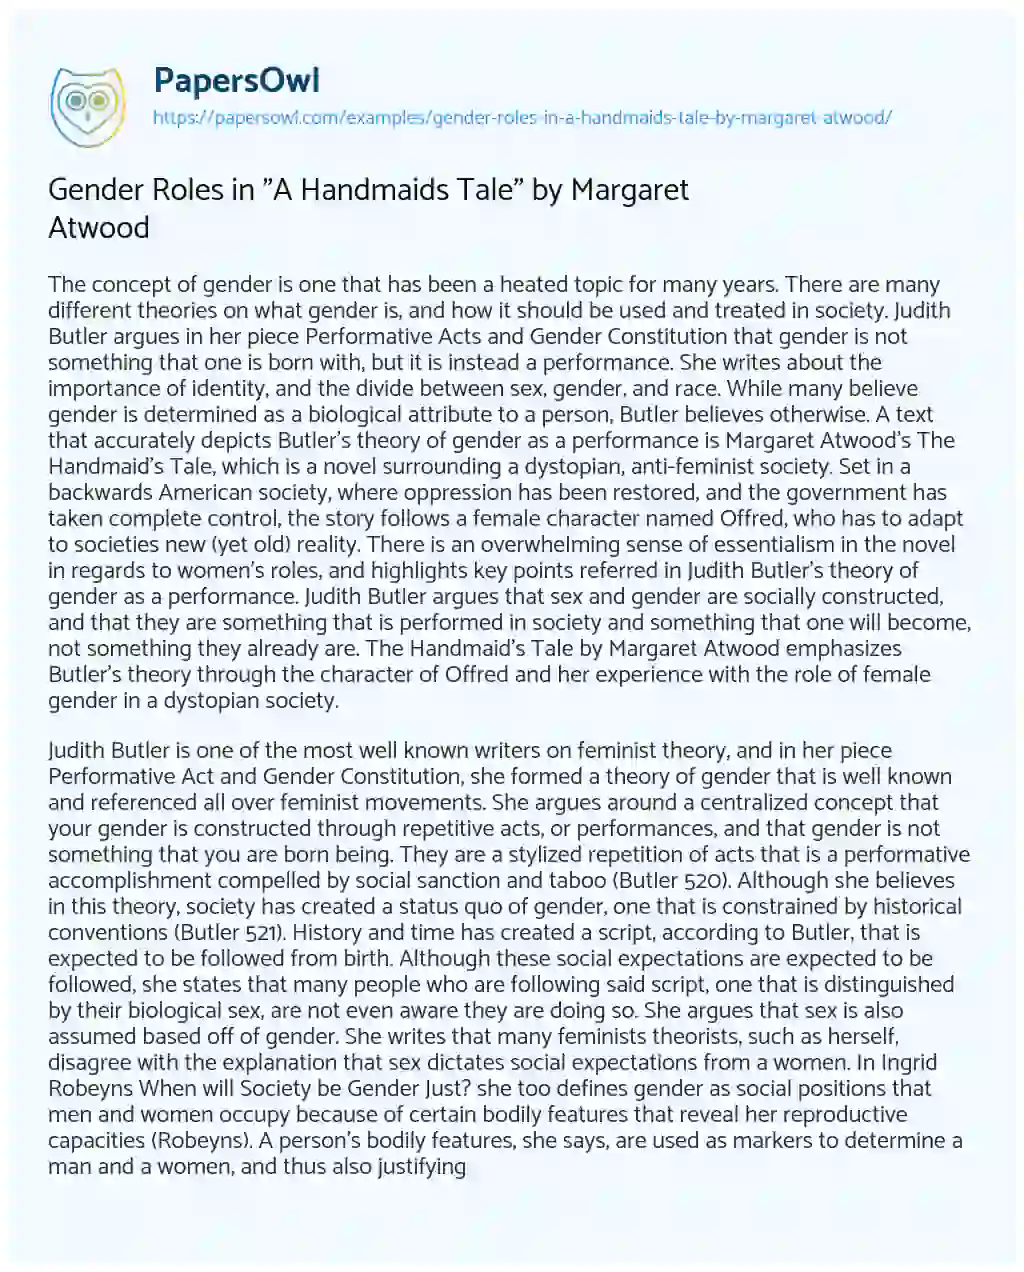 Essay on Gender Roles in “A Handmaids Tale” by Margaret Atwood